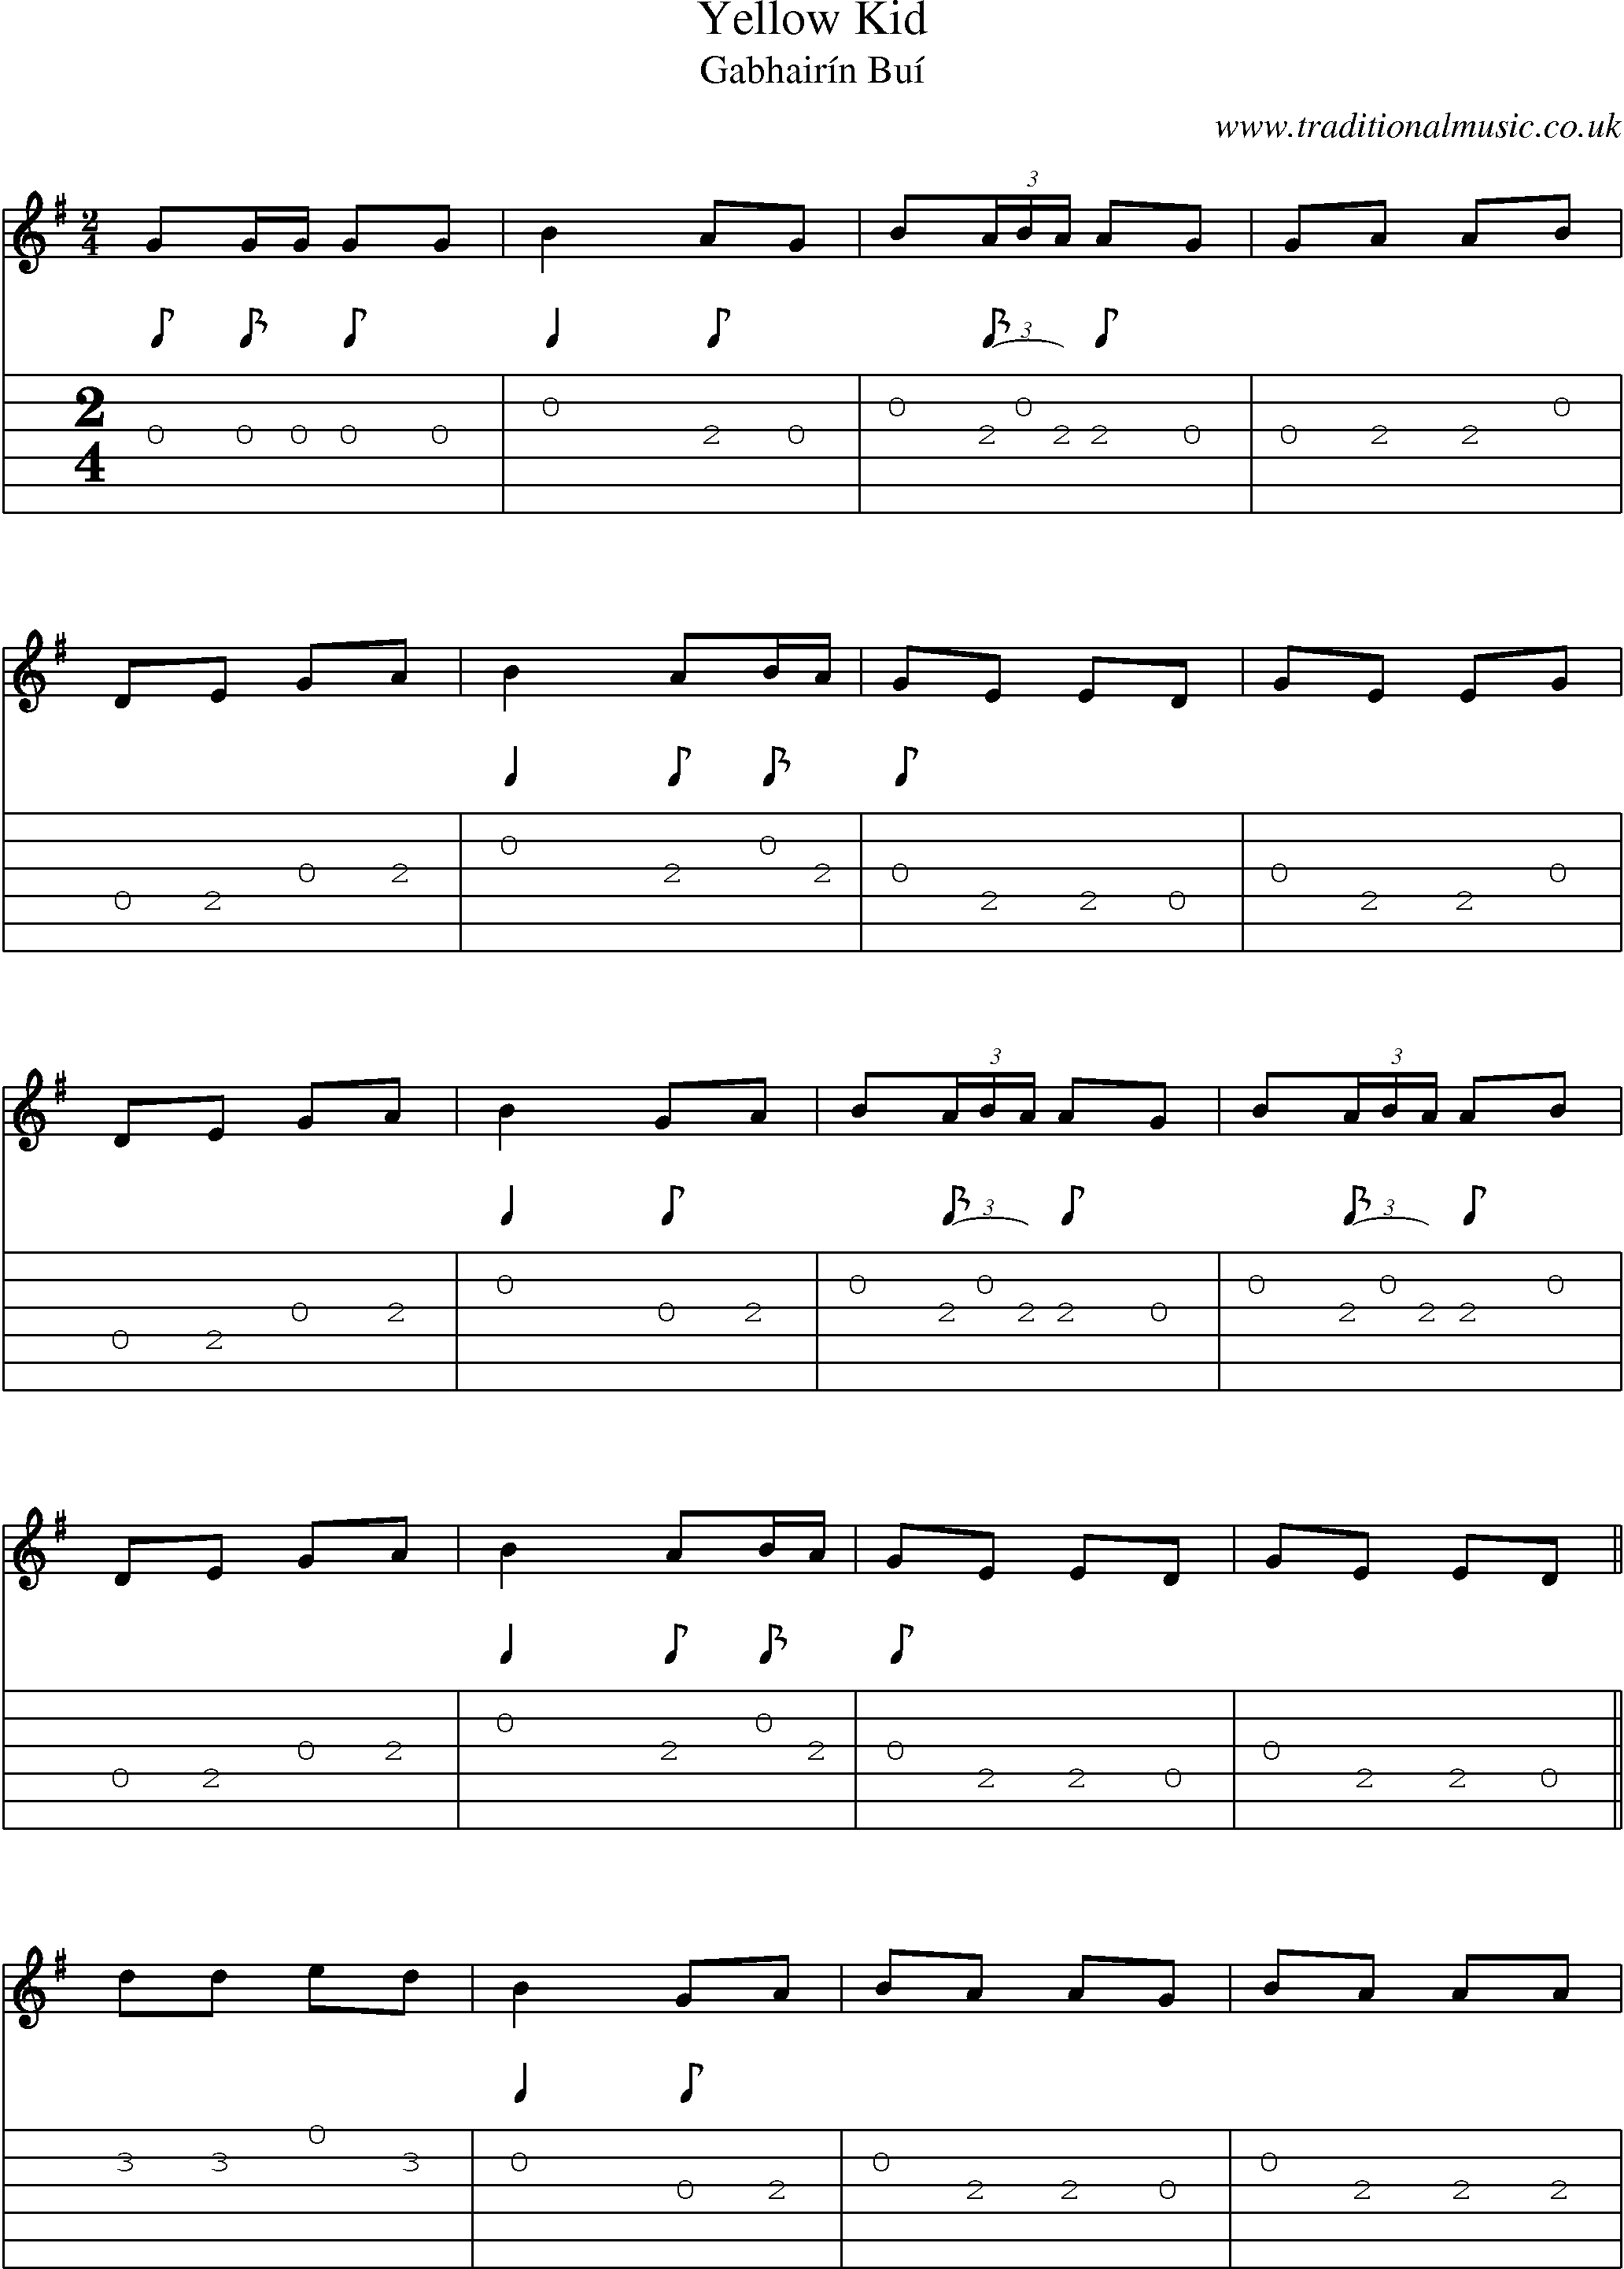 Music Score and Guitar Tabs for Yellow Kid